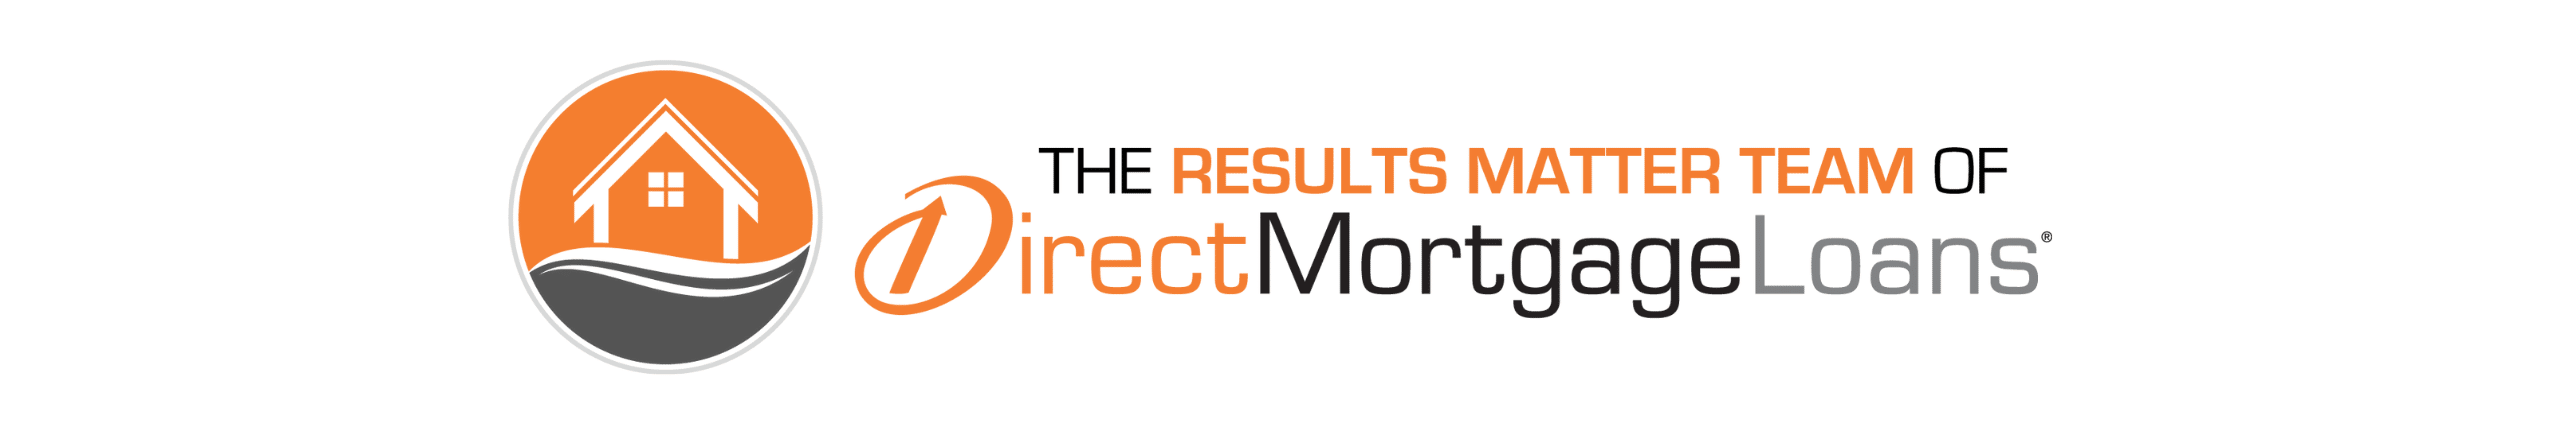 The results matter team of direct mortgage loans